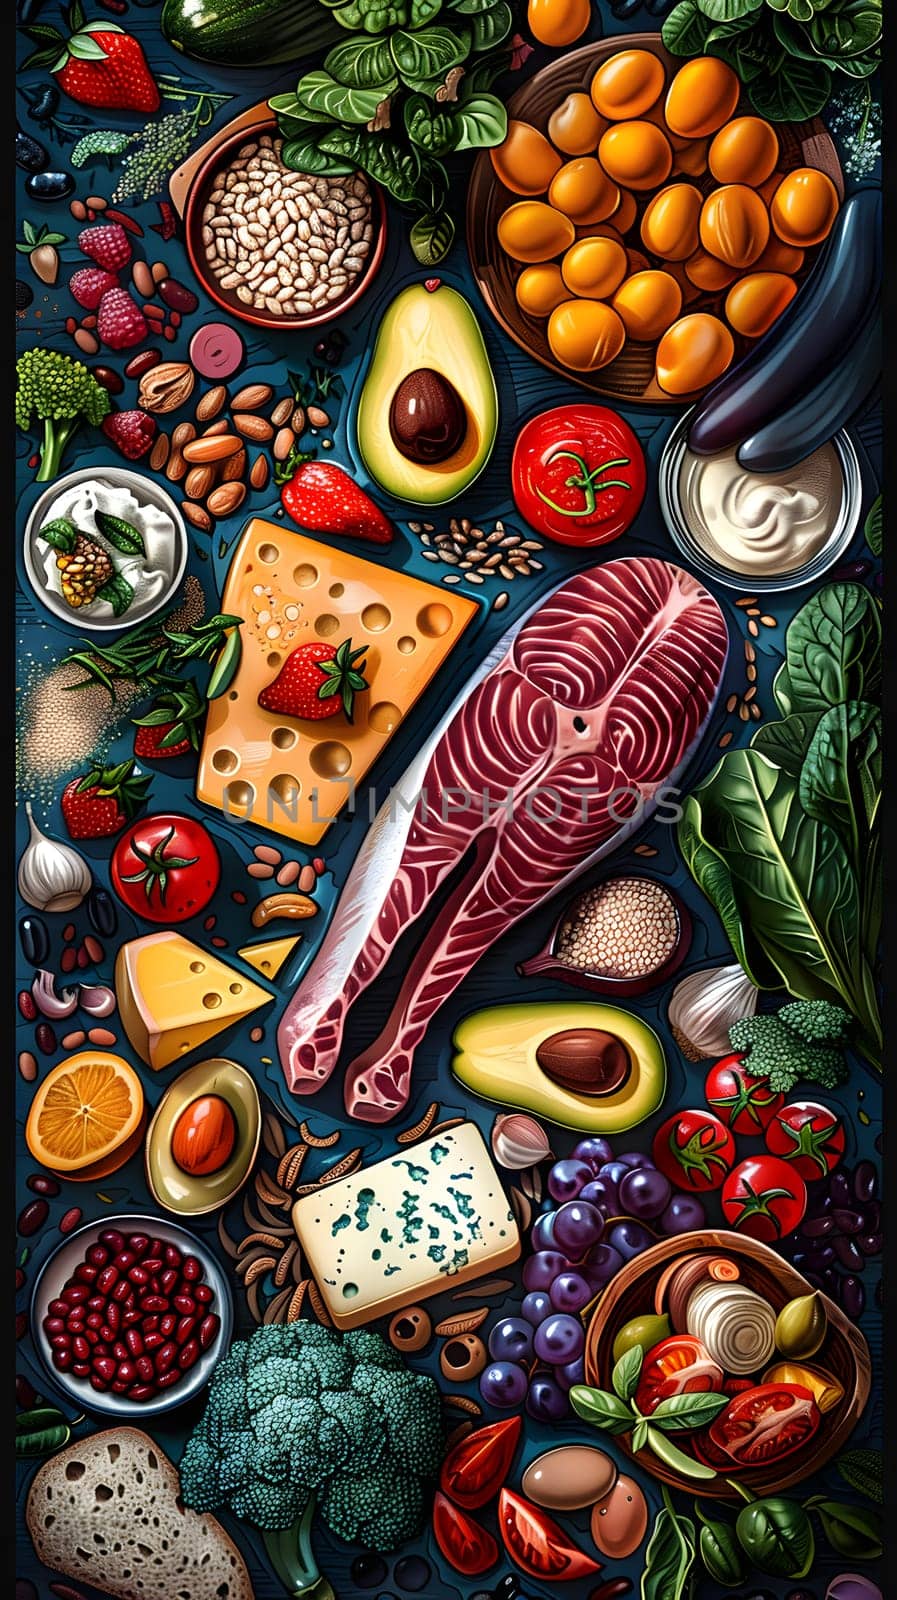 Artistic illustration of various natural foods on the table by Nadtochiy